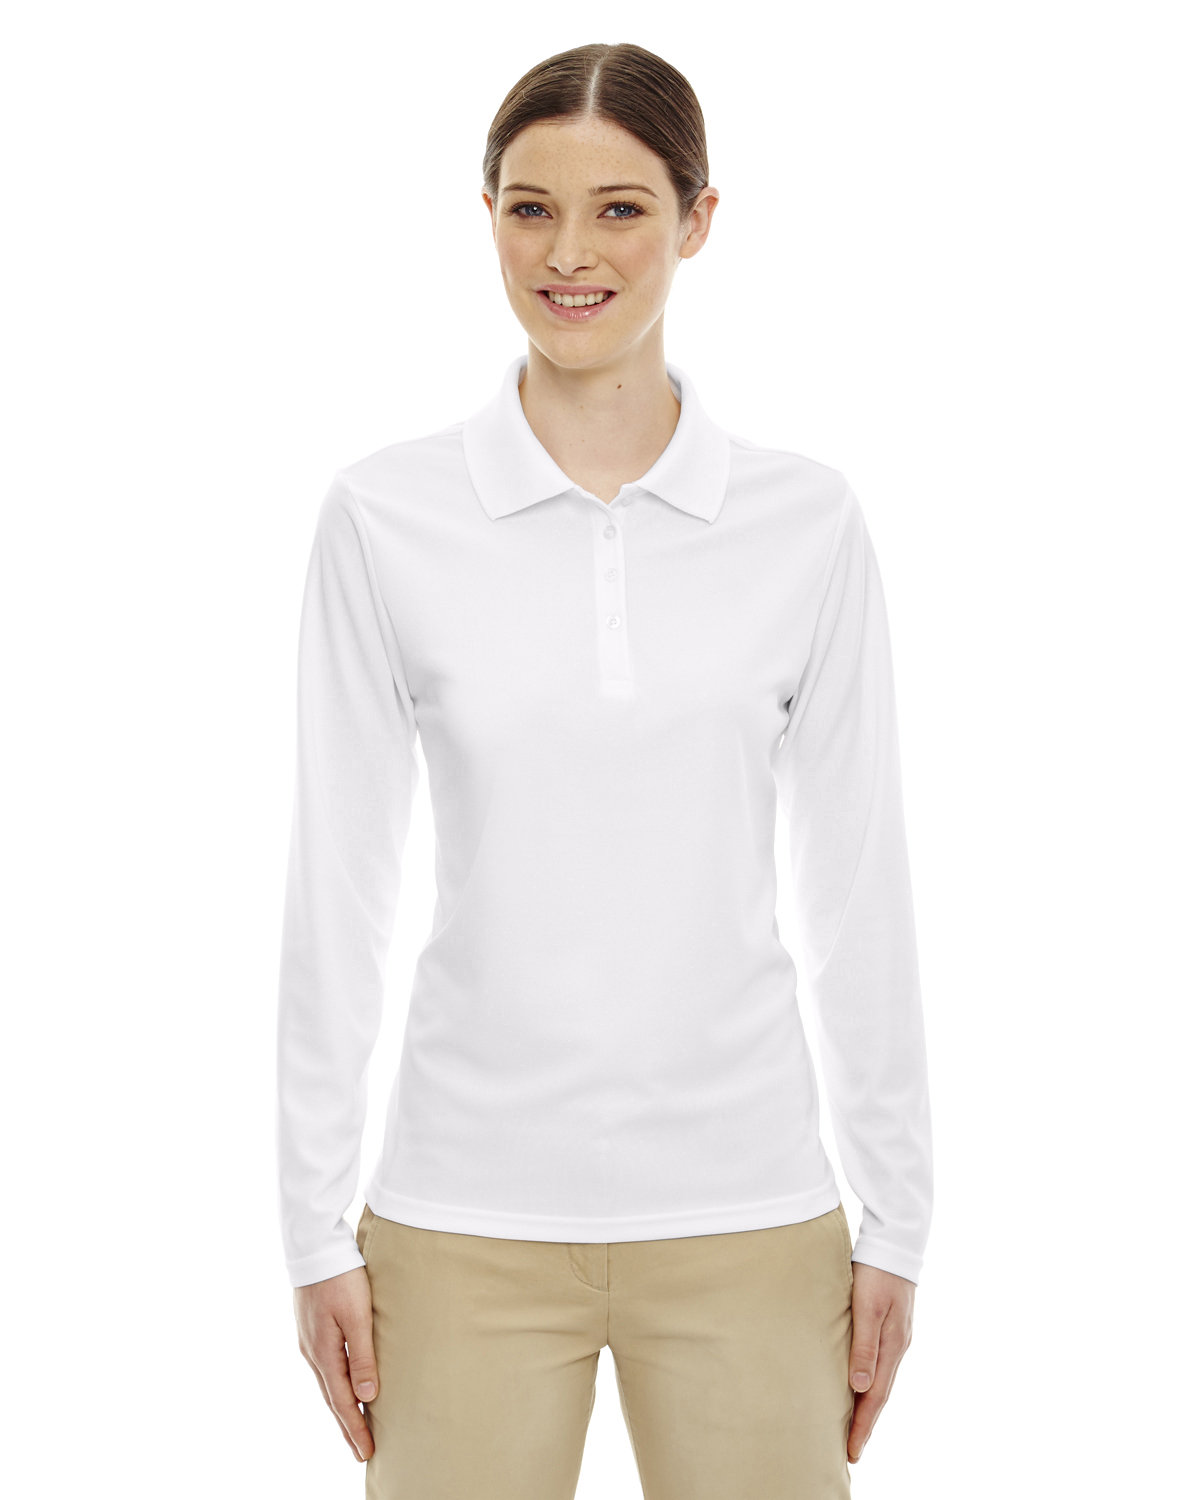 Avia Womens Tops, Part of the new women's Athleisure collection, the  long-sleeved ATL BOX POLO LS offers premium style and comfort with an urban  edge.